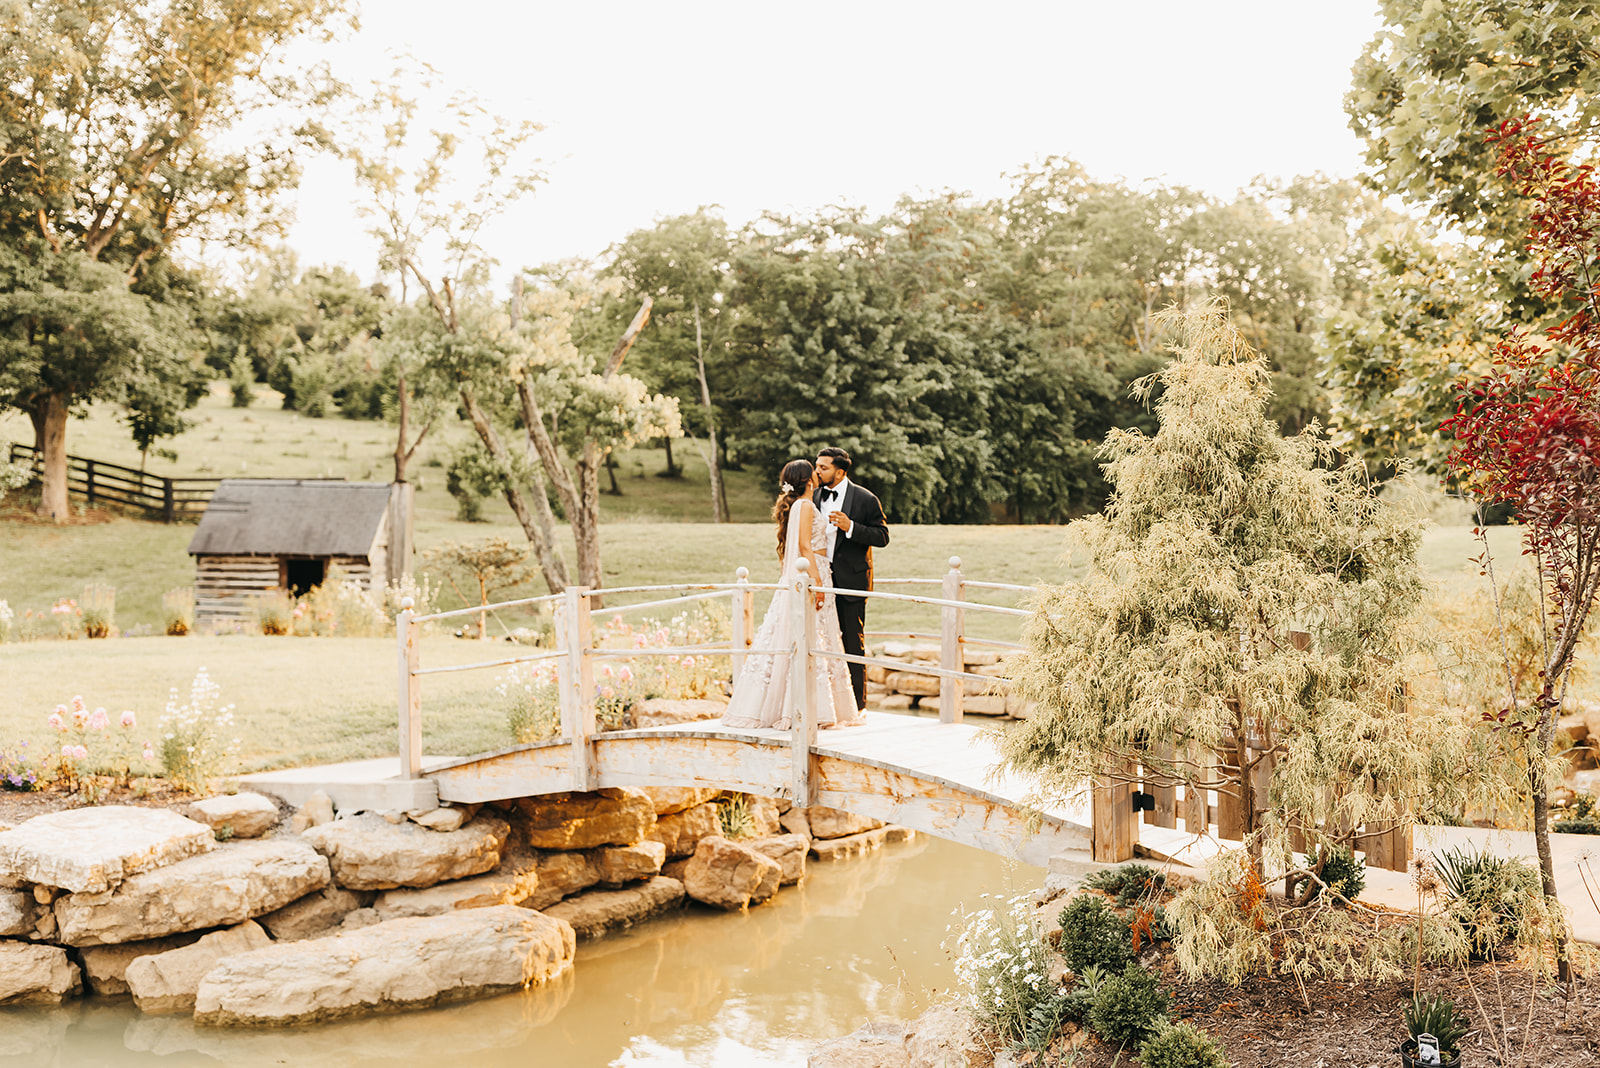 the bride and groom kiss on the small bridge going over the stream on the hazelnut farm property at sunset